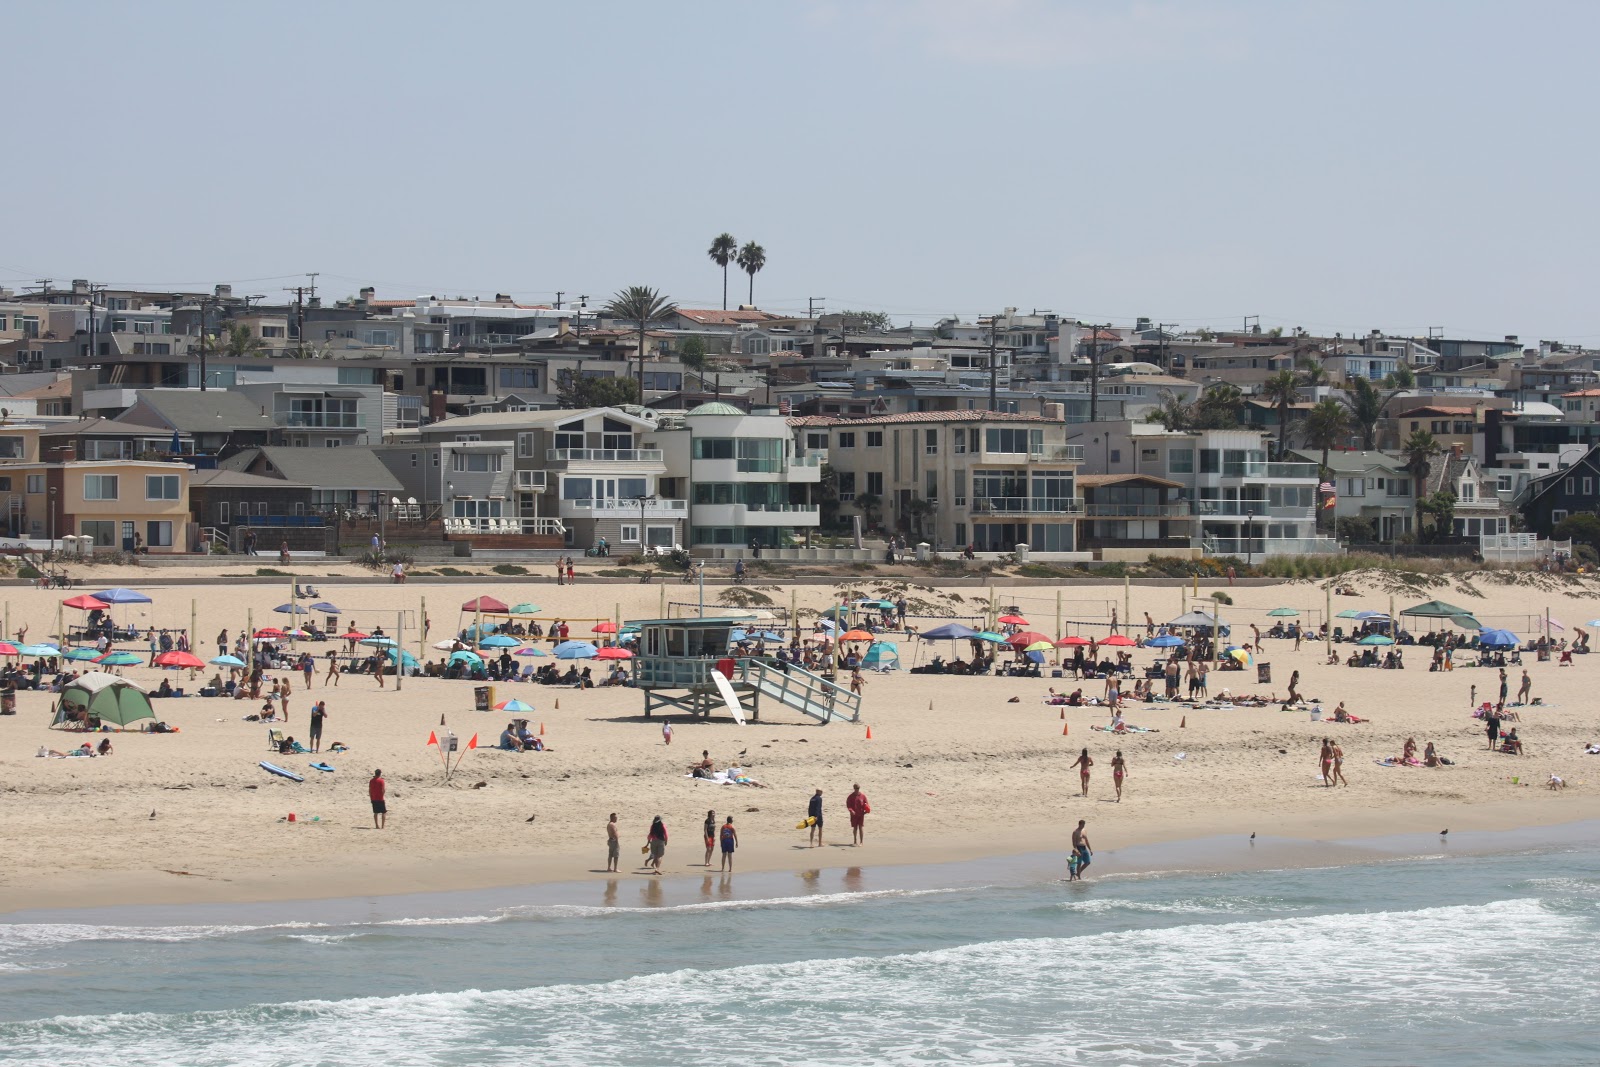 Photo of Hermosa Beach L.A. with turquoise water surface